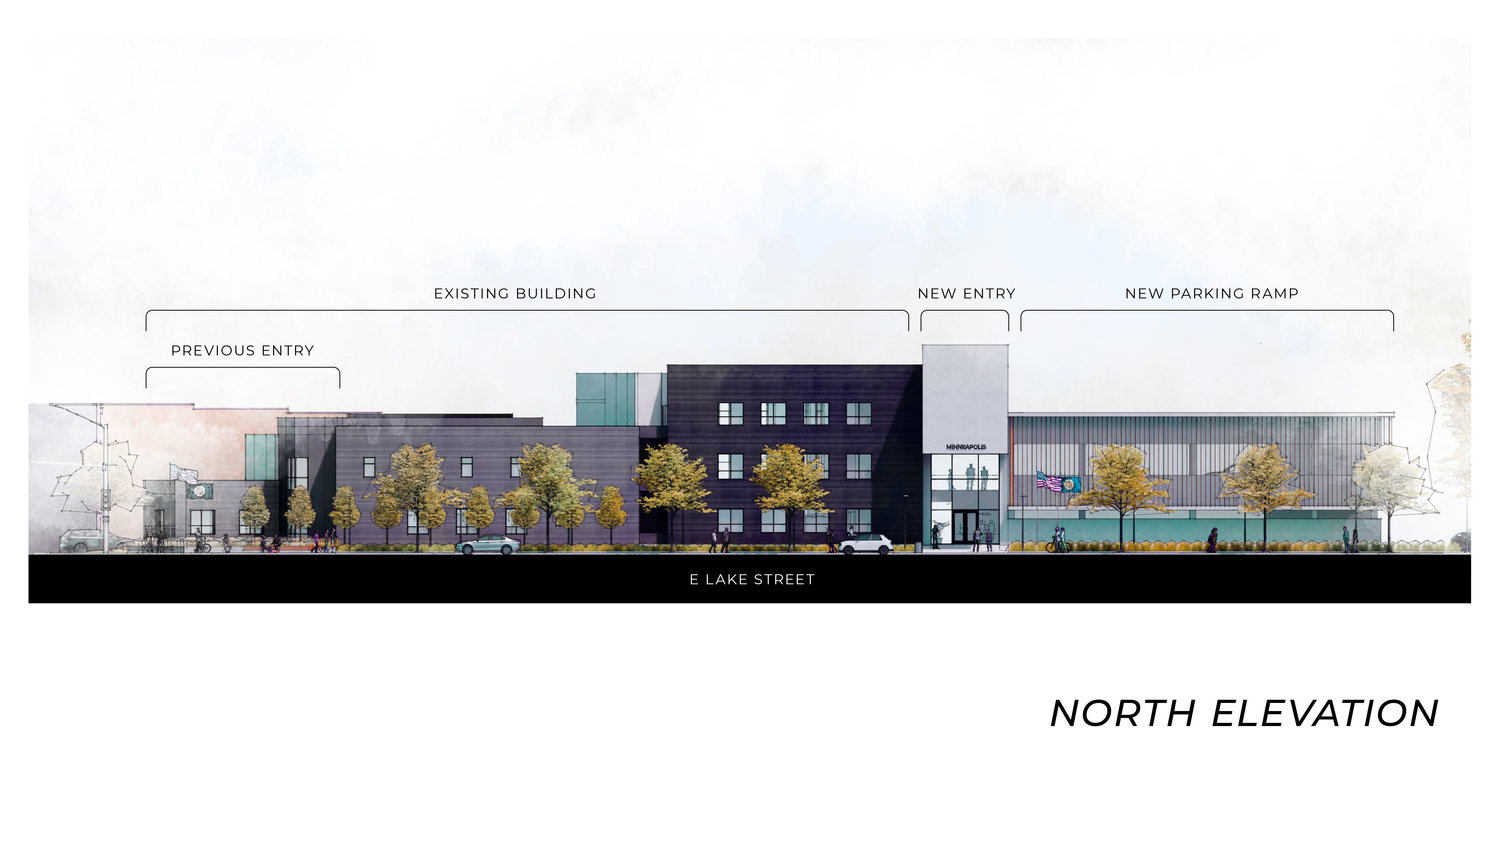 Potential redesign of 3000 Minnehaha Ave. 3rd Precinct building. According to the city website, "They're meant to help with conversations about potential locations. The renderings are not final designs. Future decisions will inform the final building design."